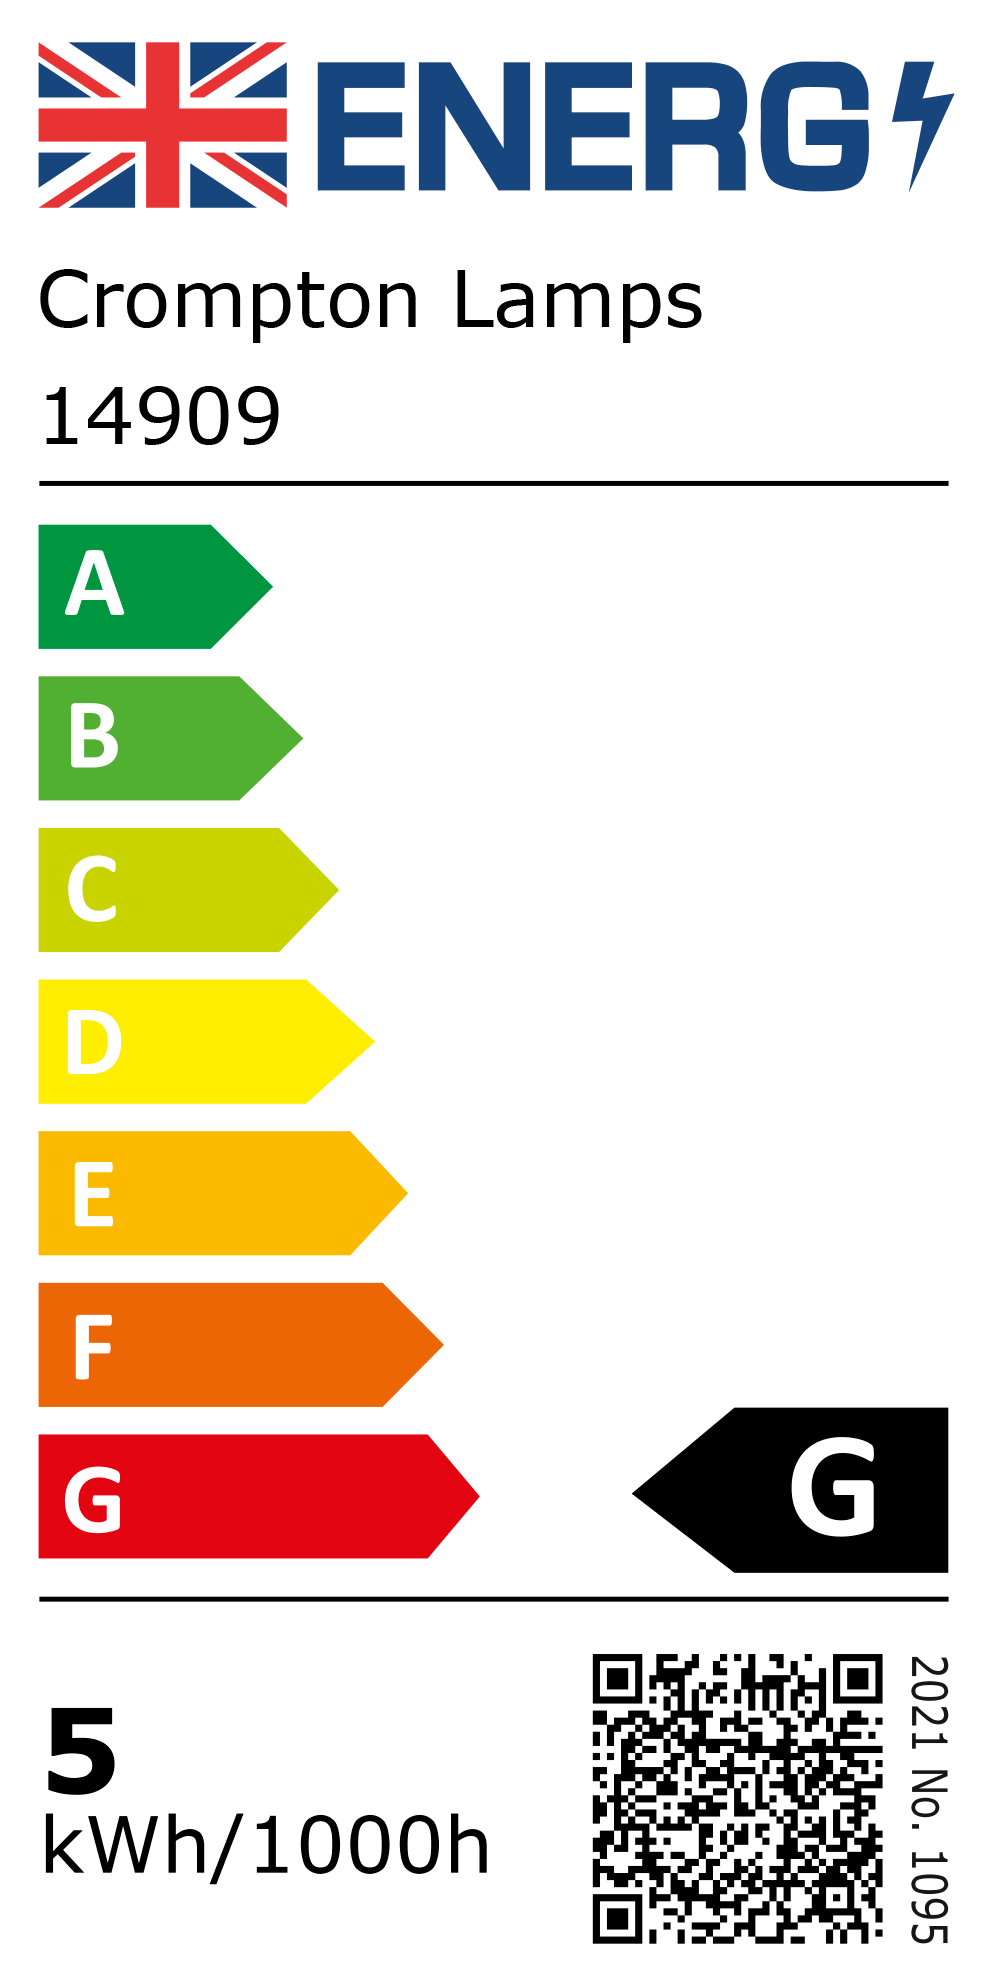 New 2021 Energy Rating Label: Stock Code 14909